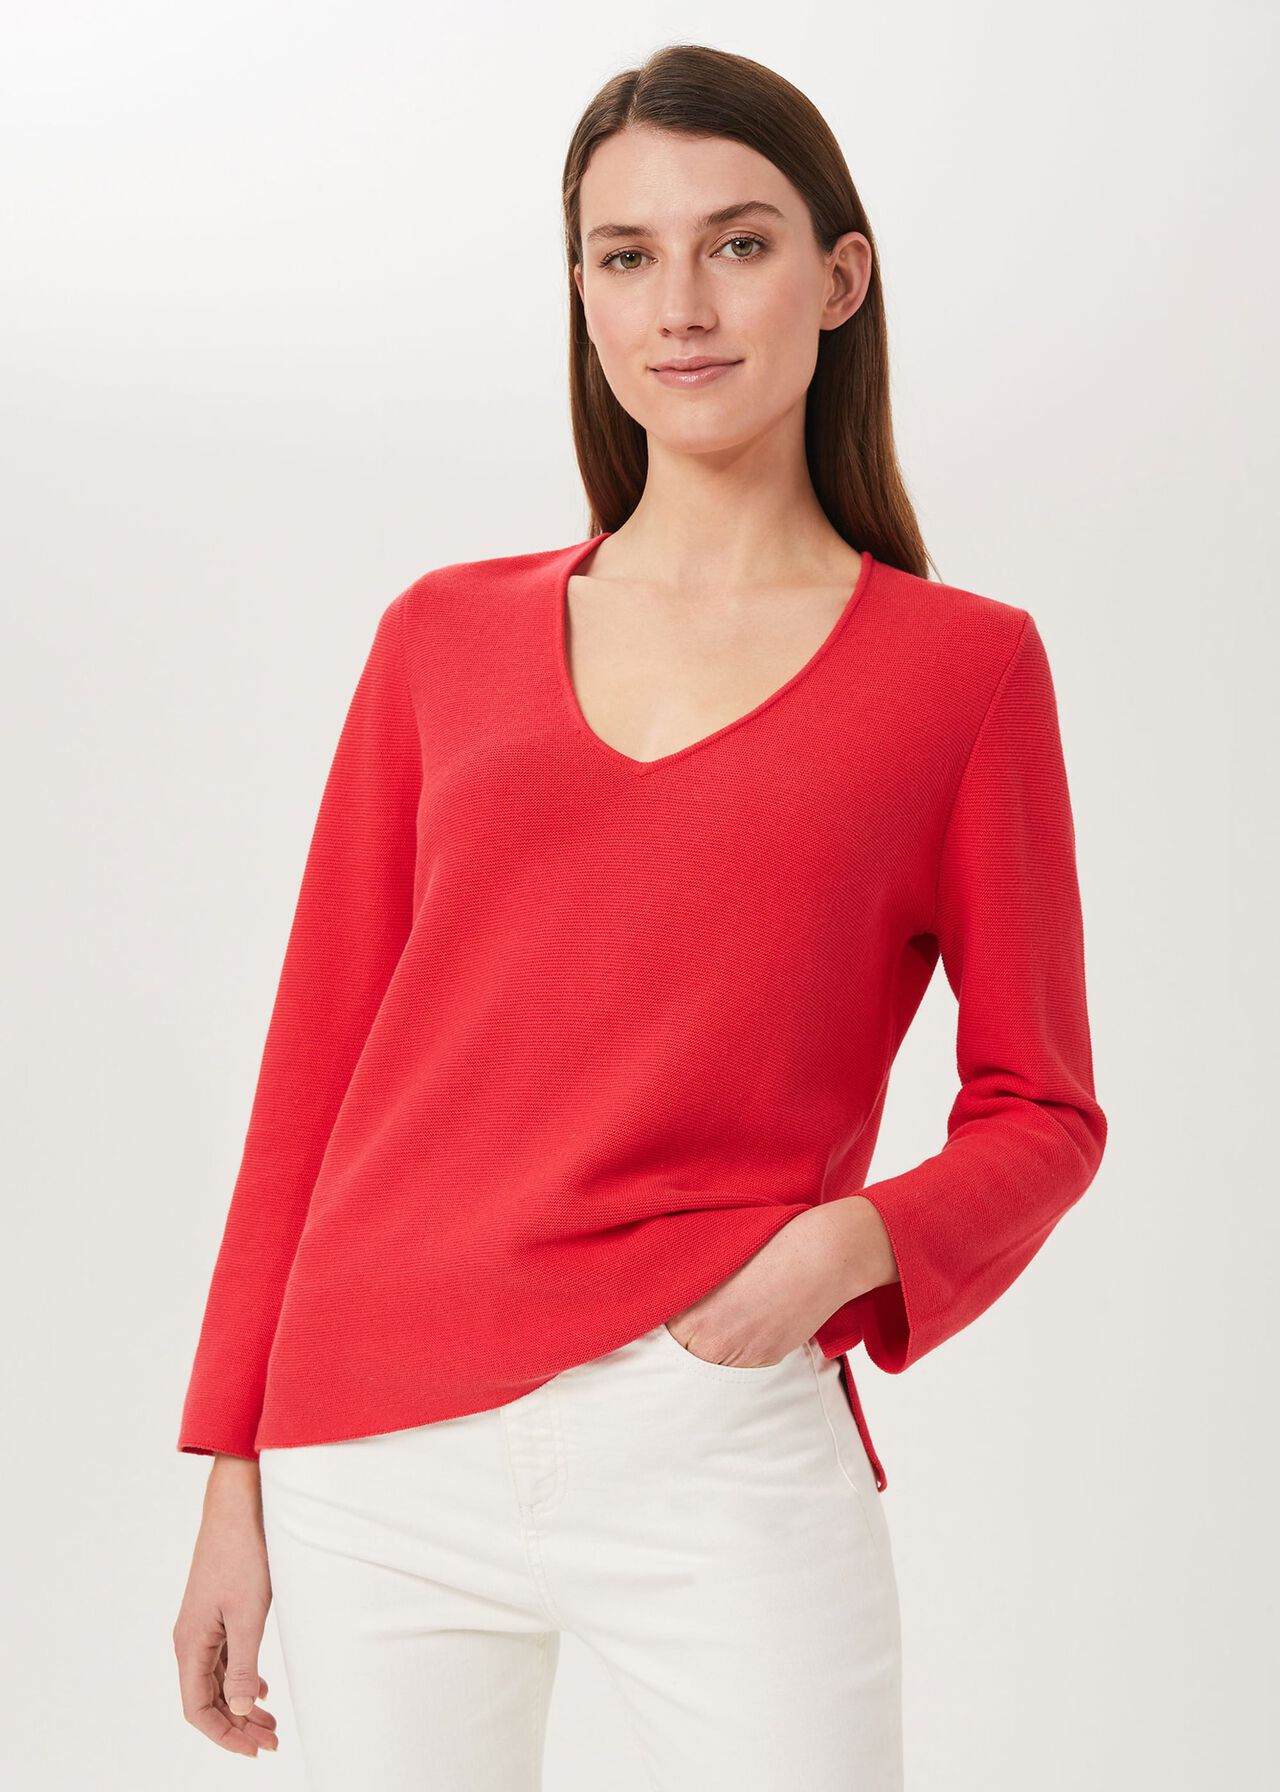 Blanche Cotton Sweater, Coral Red, hi-res